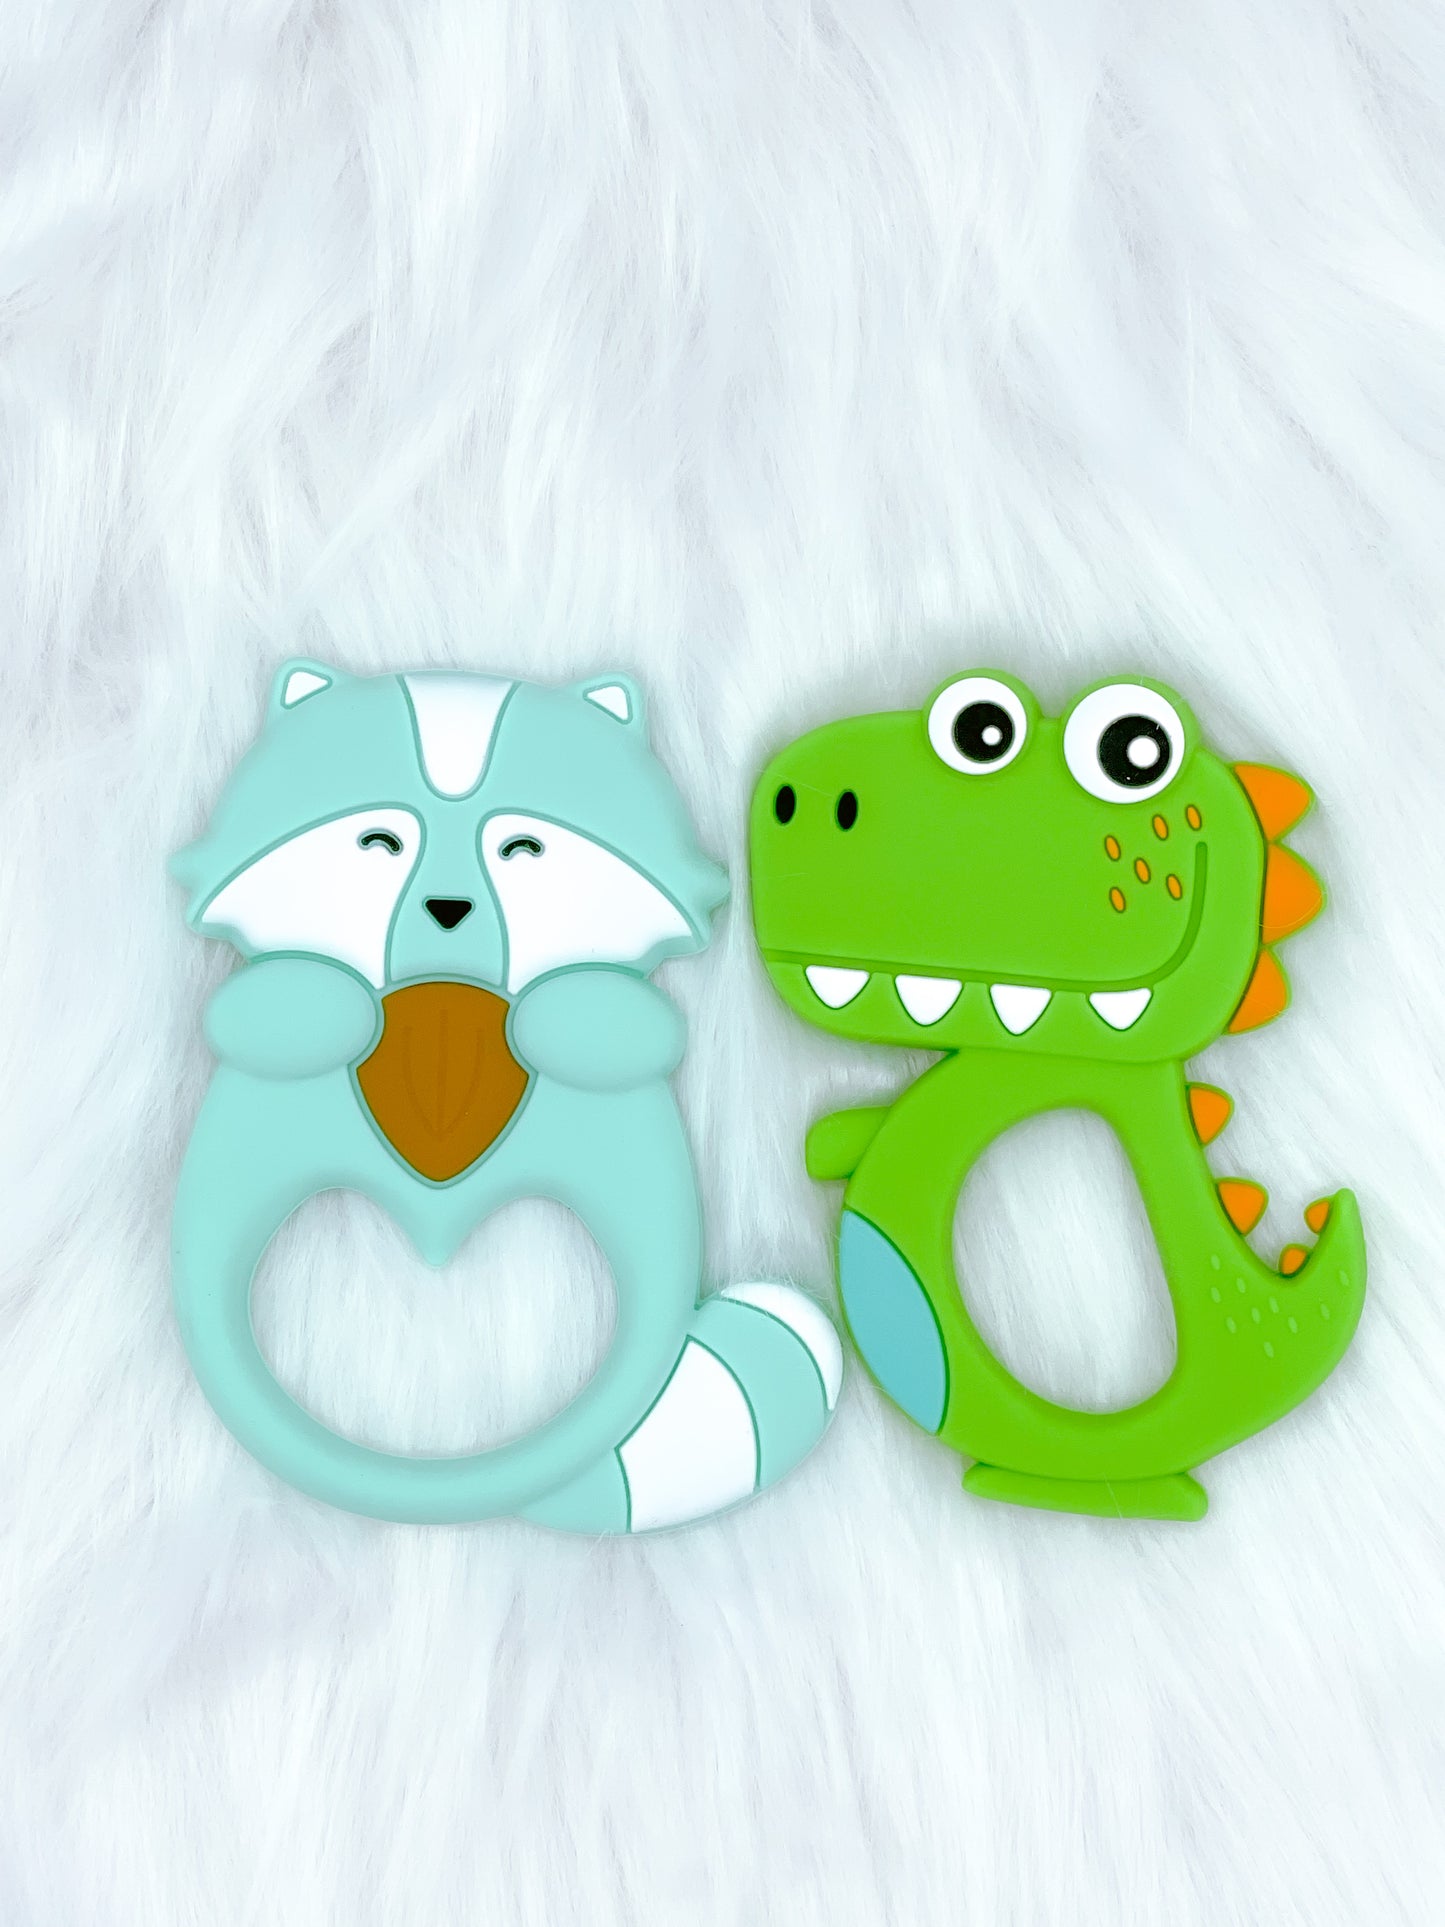 Racoon and Dino Teether Chew Toy Bundle - 2 piece set